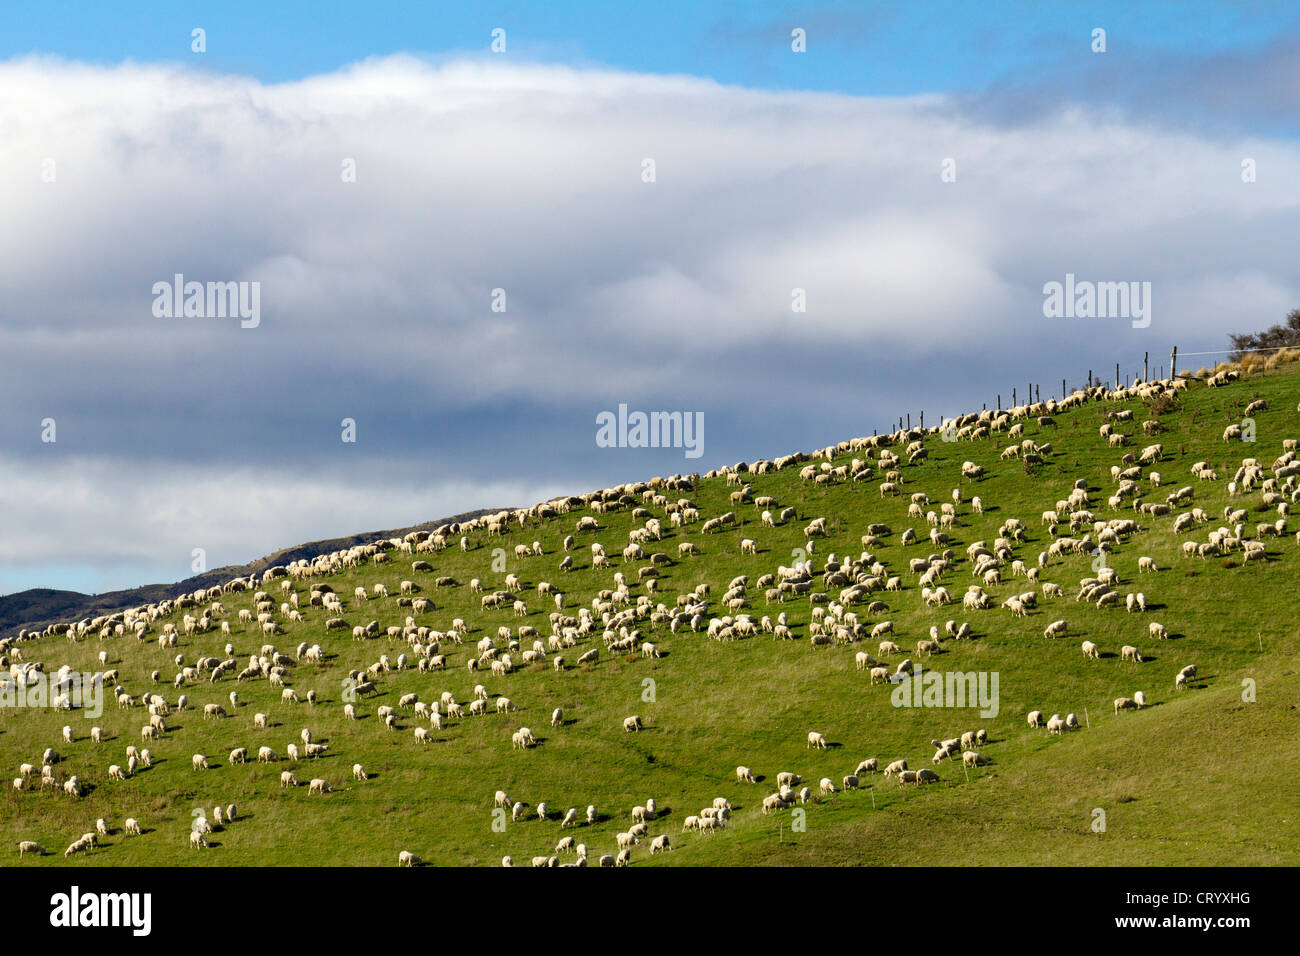 A hill full of sheep, South Island of New Zealand Stock Photo